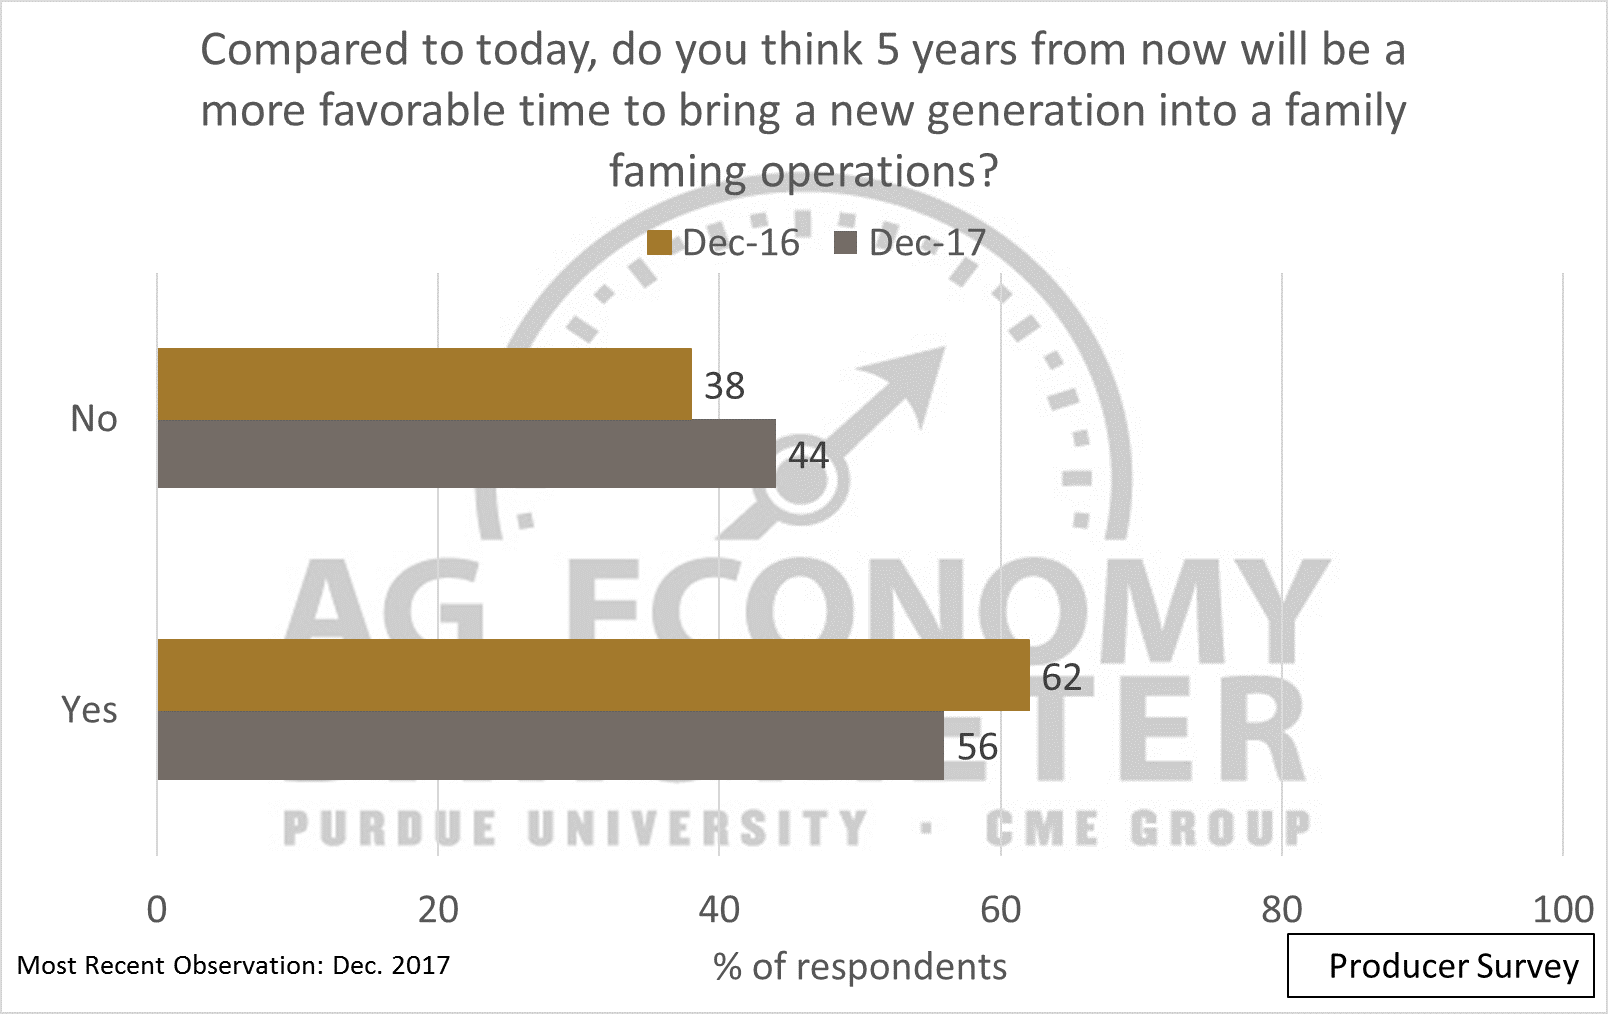 Figure 8. Survey Responses to 5 Years from now Being a Better Time to Bring a New Generation into a Family Farming Operation, December 2016 and December 2017.